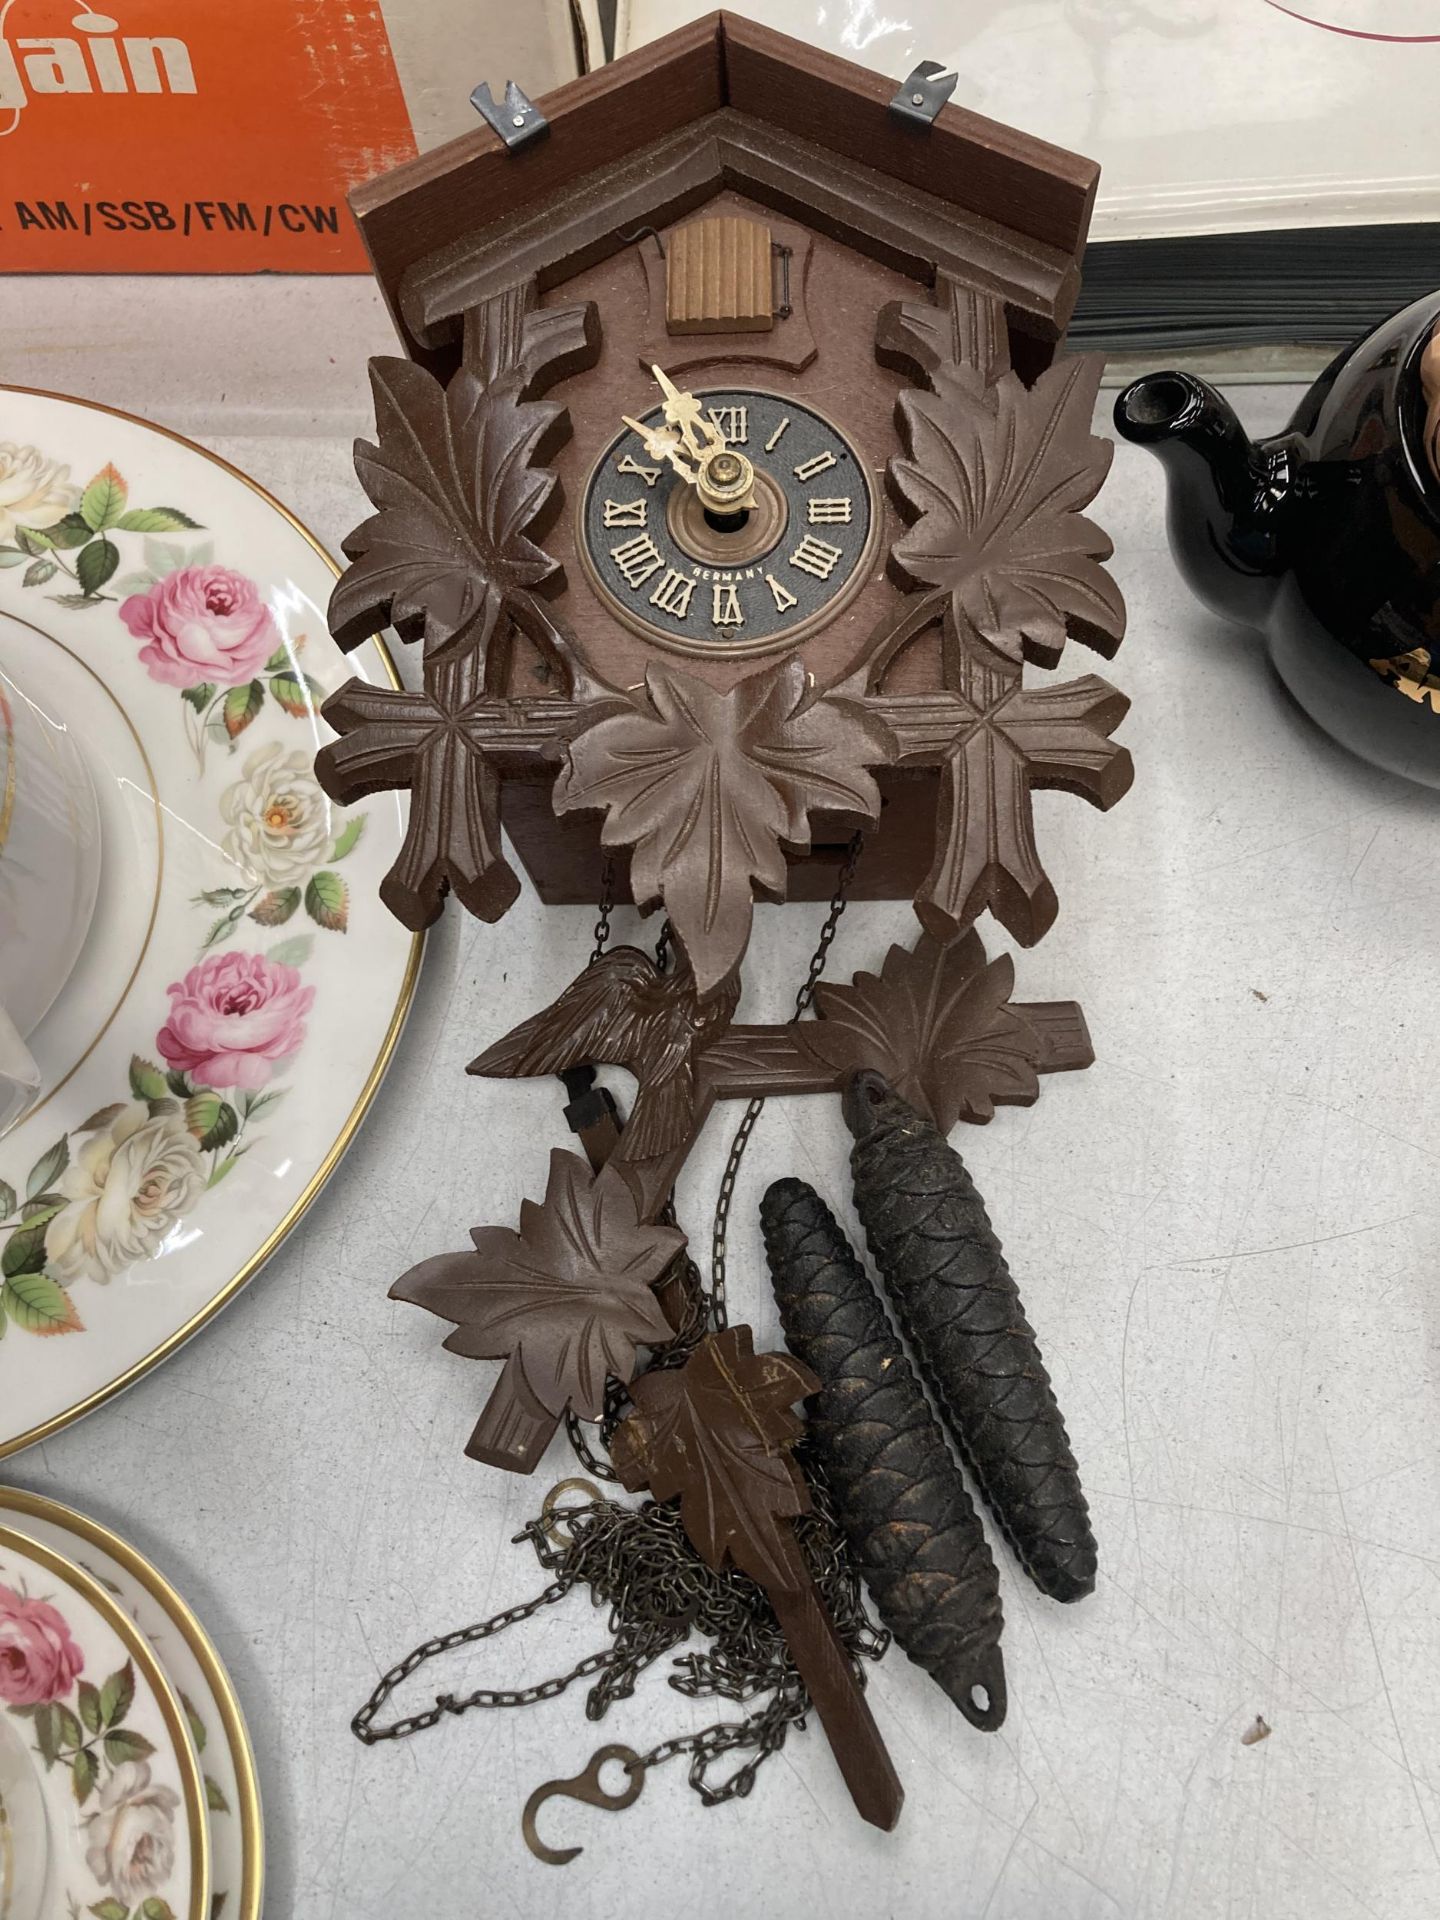 A WOODEN CUCKOO CLOCK WITH WEIGHTS